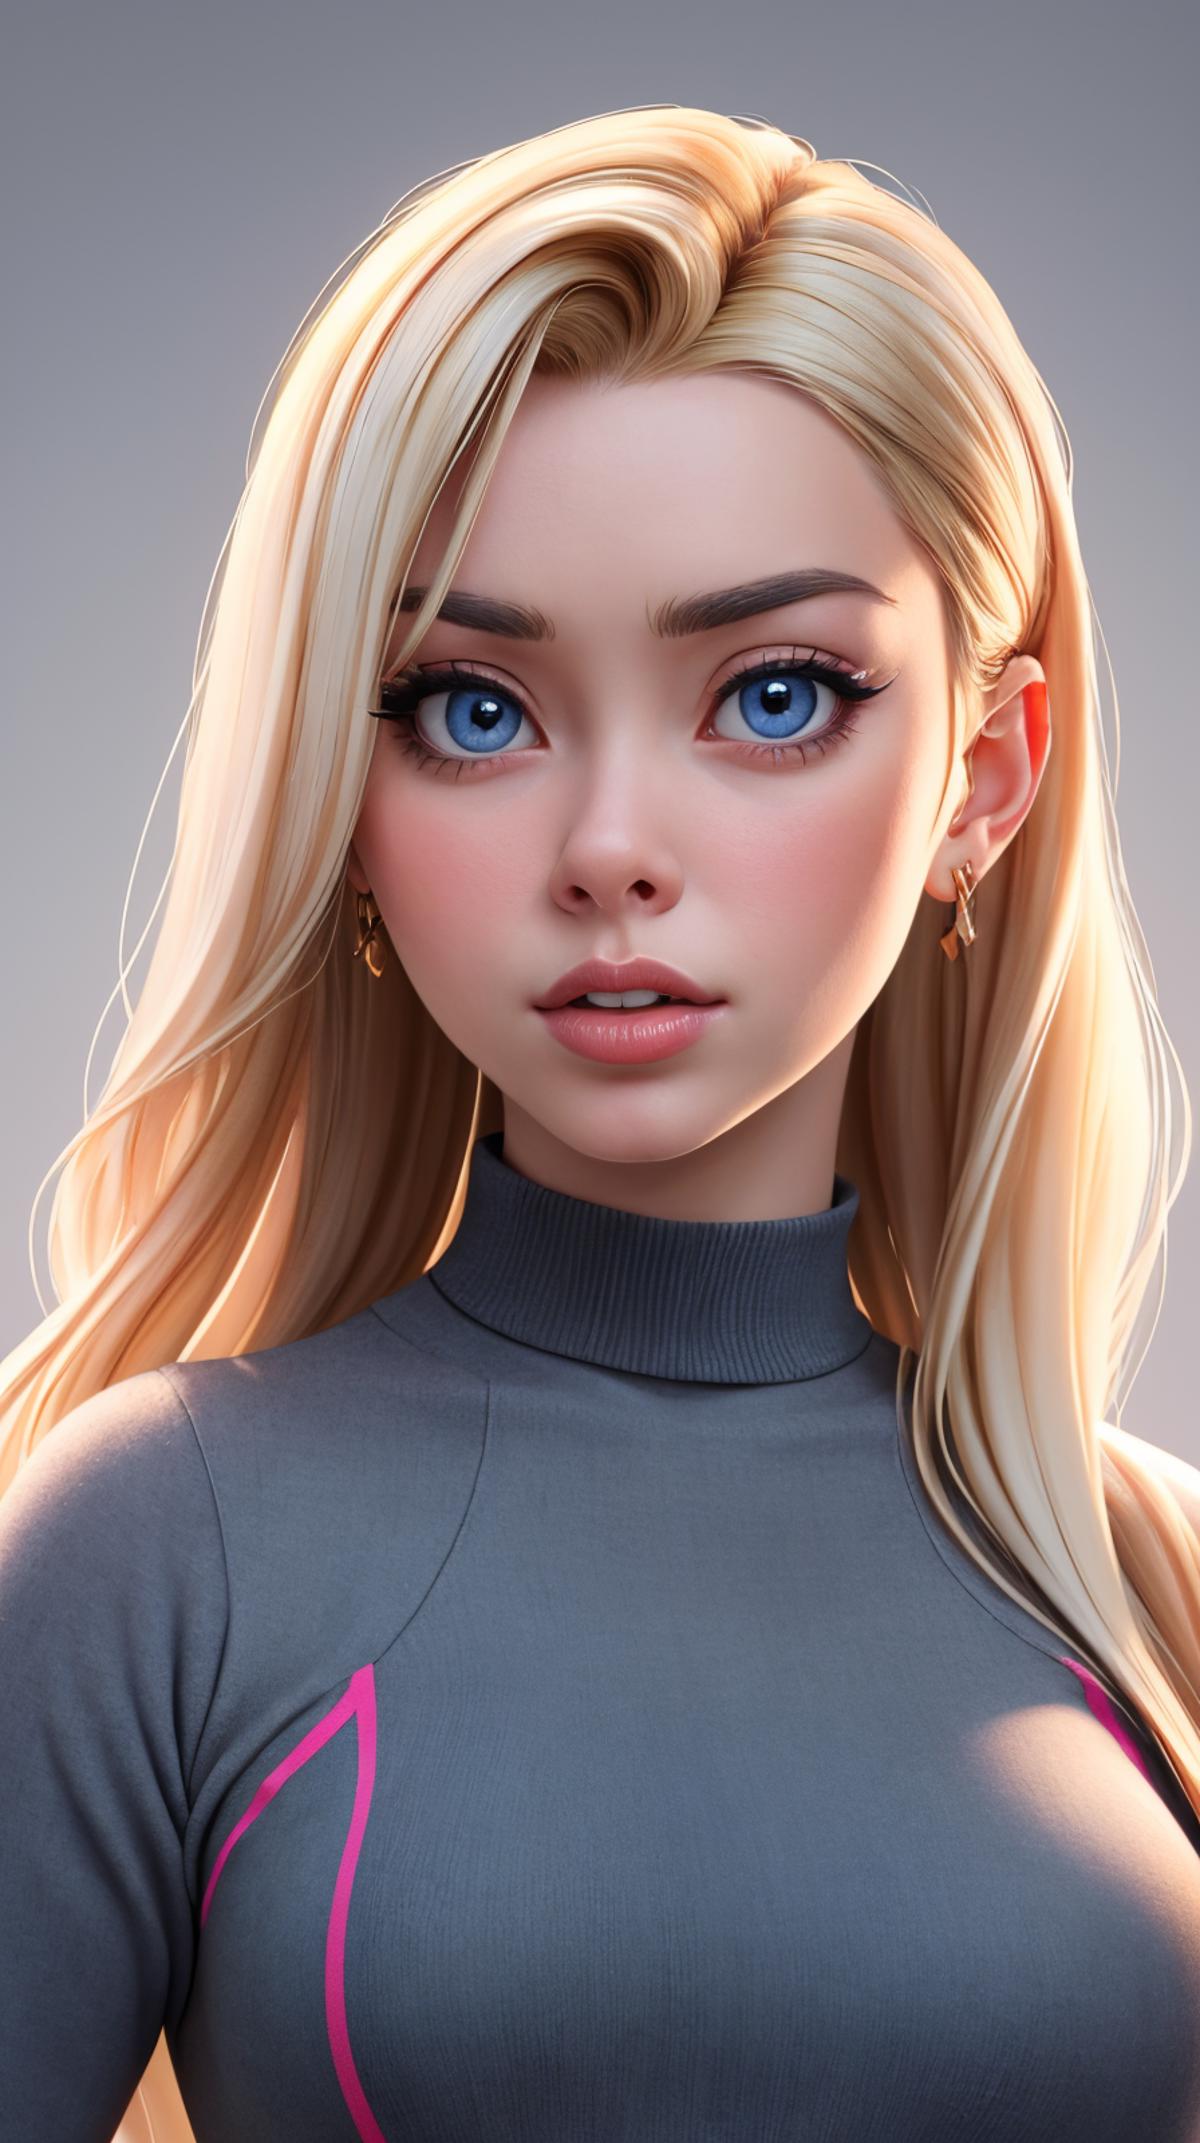 AI model image by SexyToons